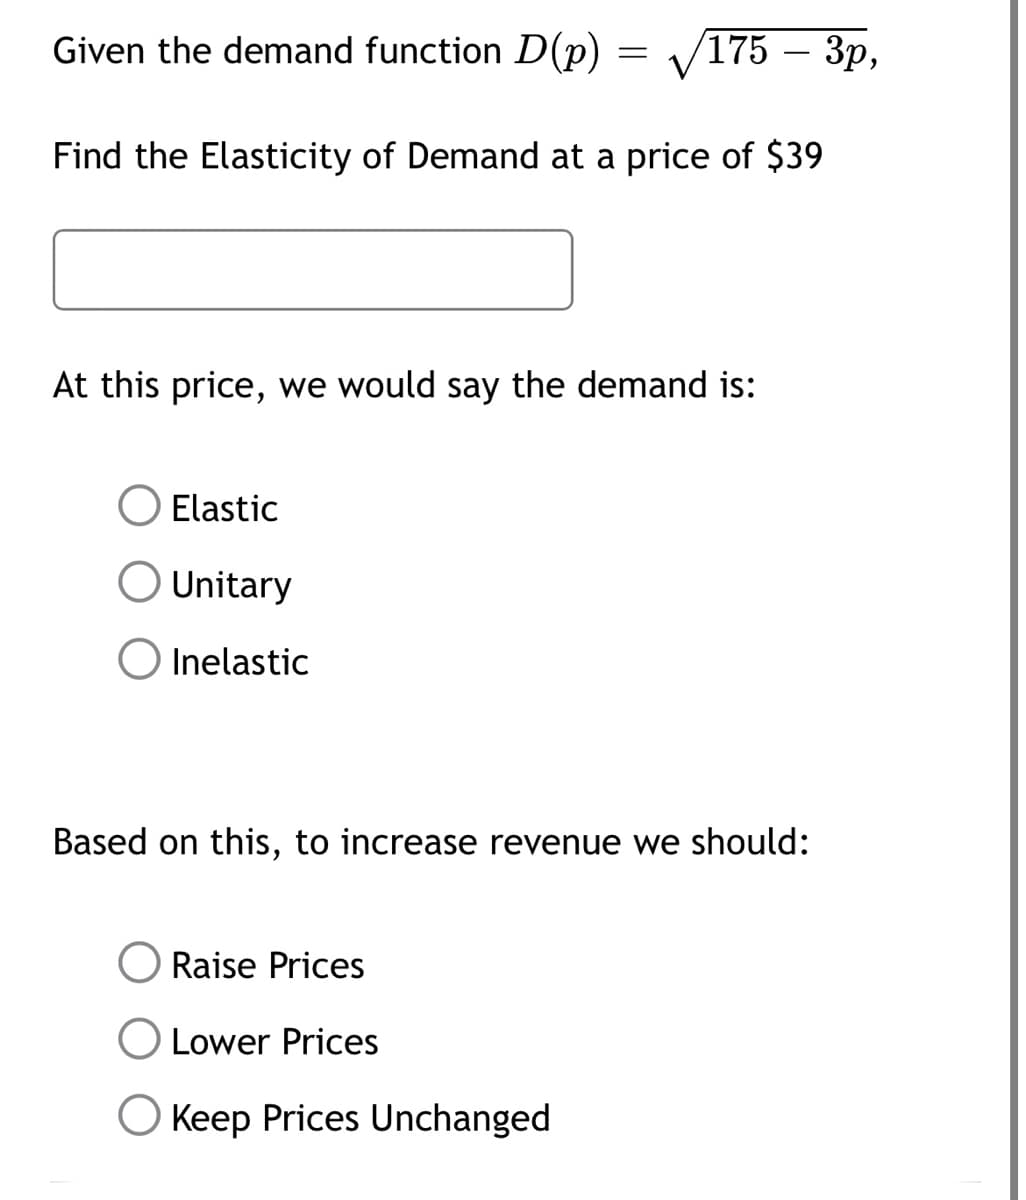 Given the demand function D(p) /175 - 3p,
Find the Elasticity of Demand at a price of $39
=
At this price, we would say the demand is:
Elastic
Unitary
O Inelastic
Based on this, to increase revenue we should:
Raise Prices
Lower Prices
Keep Prices Unchanged